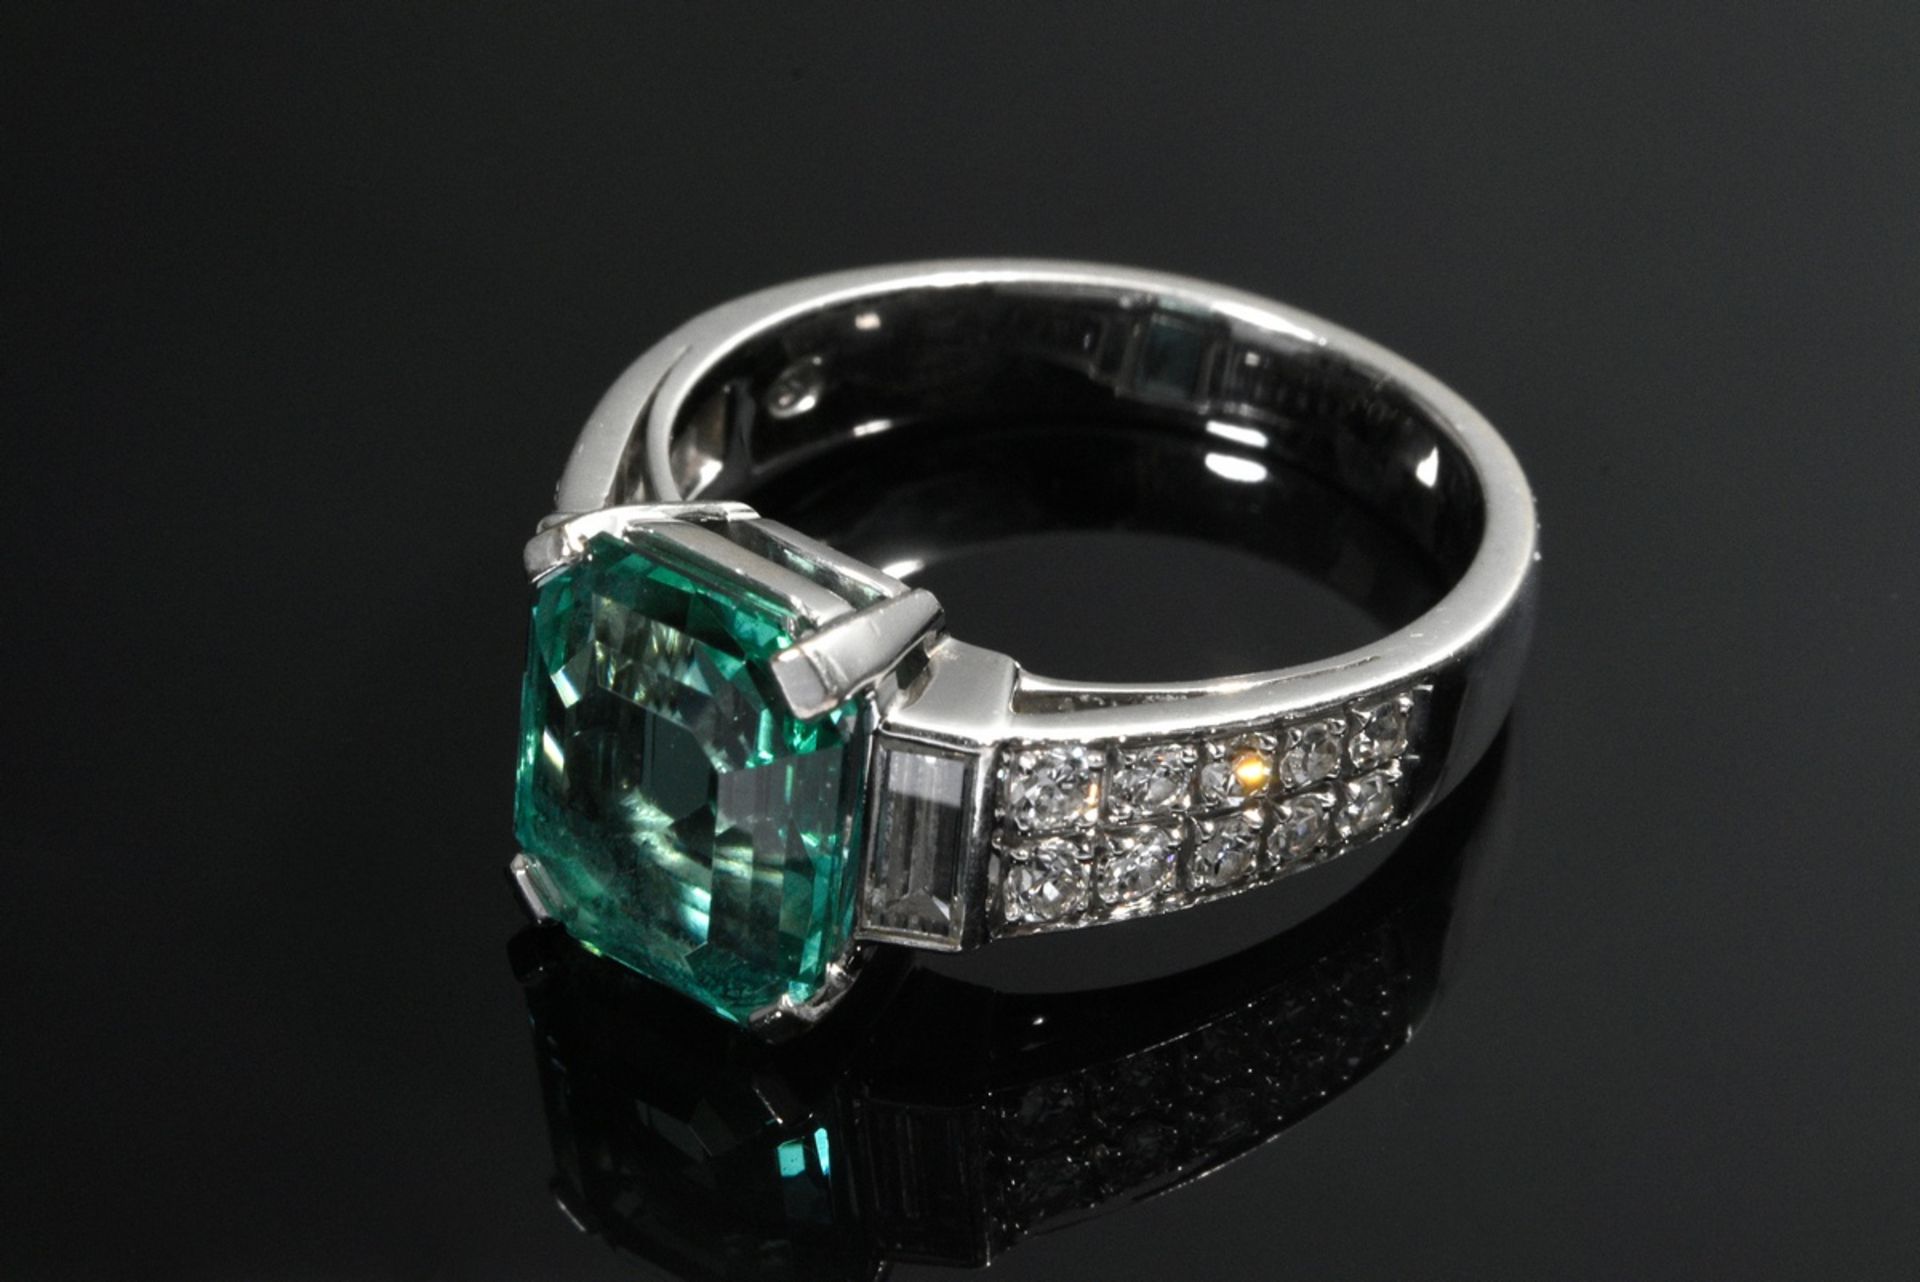 White gold 750 ring with emerald-cut tourmaline (approx. 2.70ct) and brilliant- and baguette-cut di - Image 2 of 4